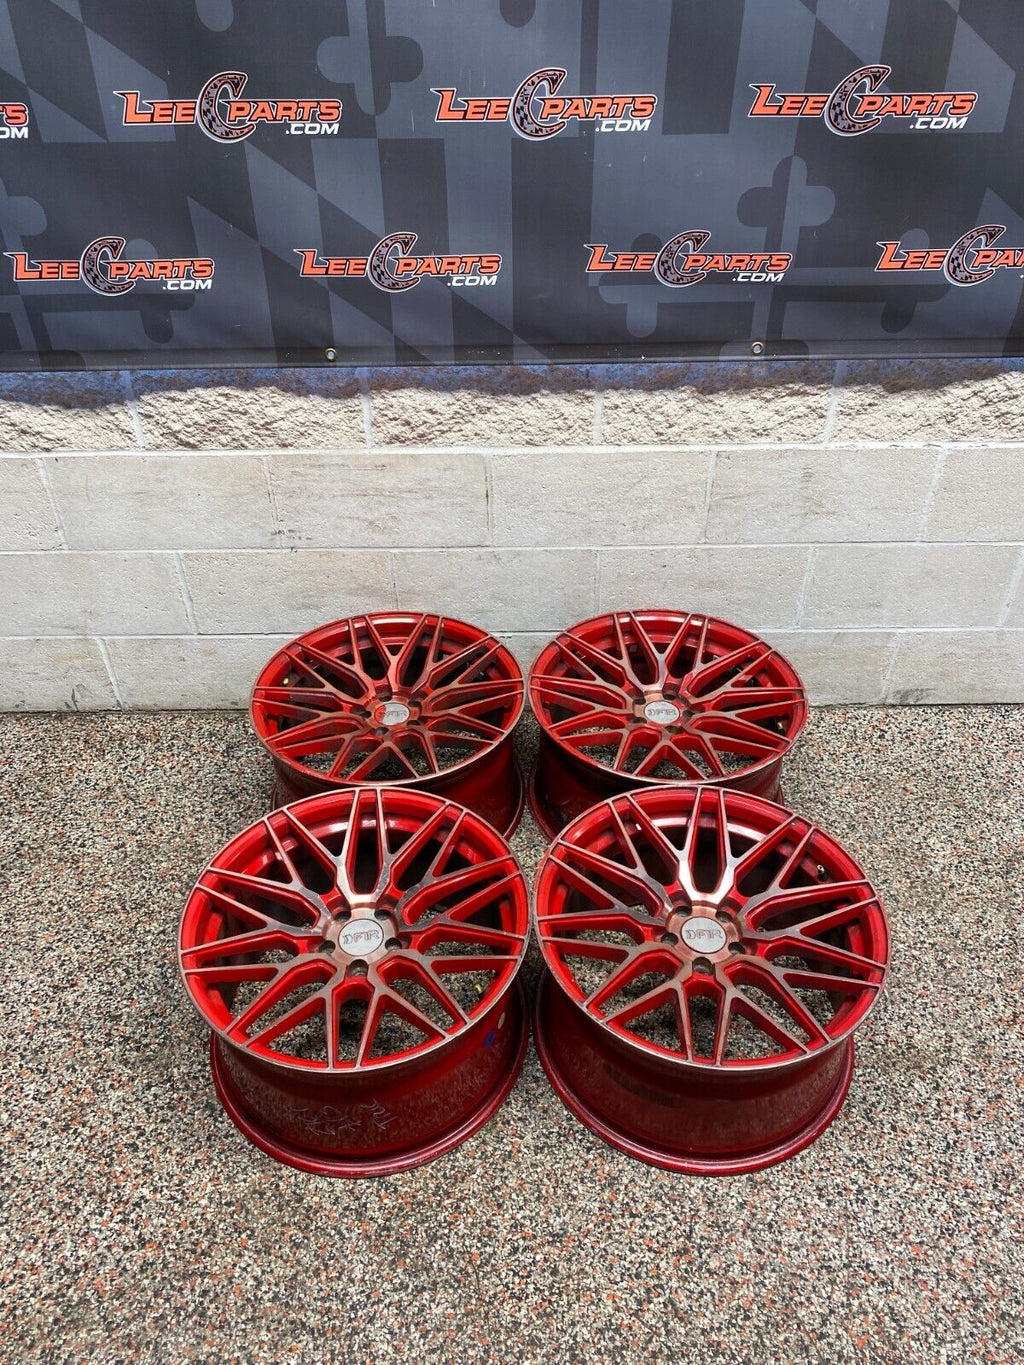 2010 CAMARO SS F1R WHEELS F103 CANDY RED 18x9.5  SET OF 4 USED